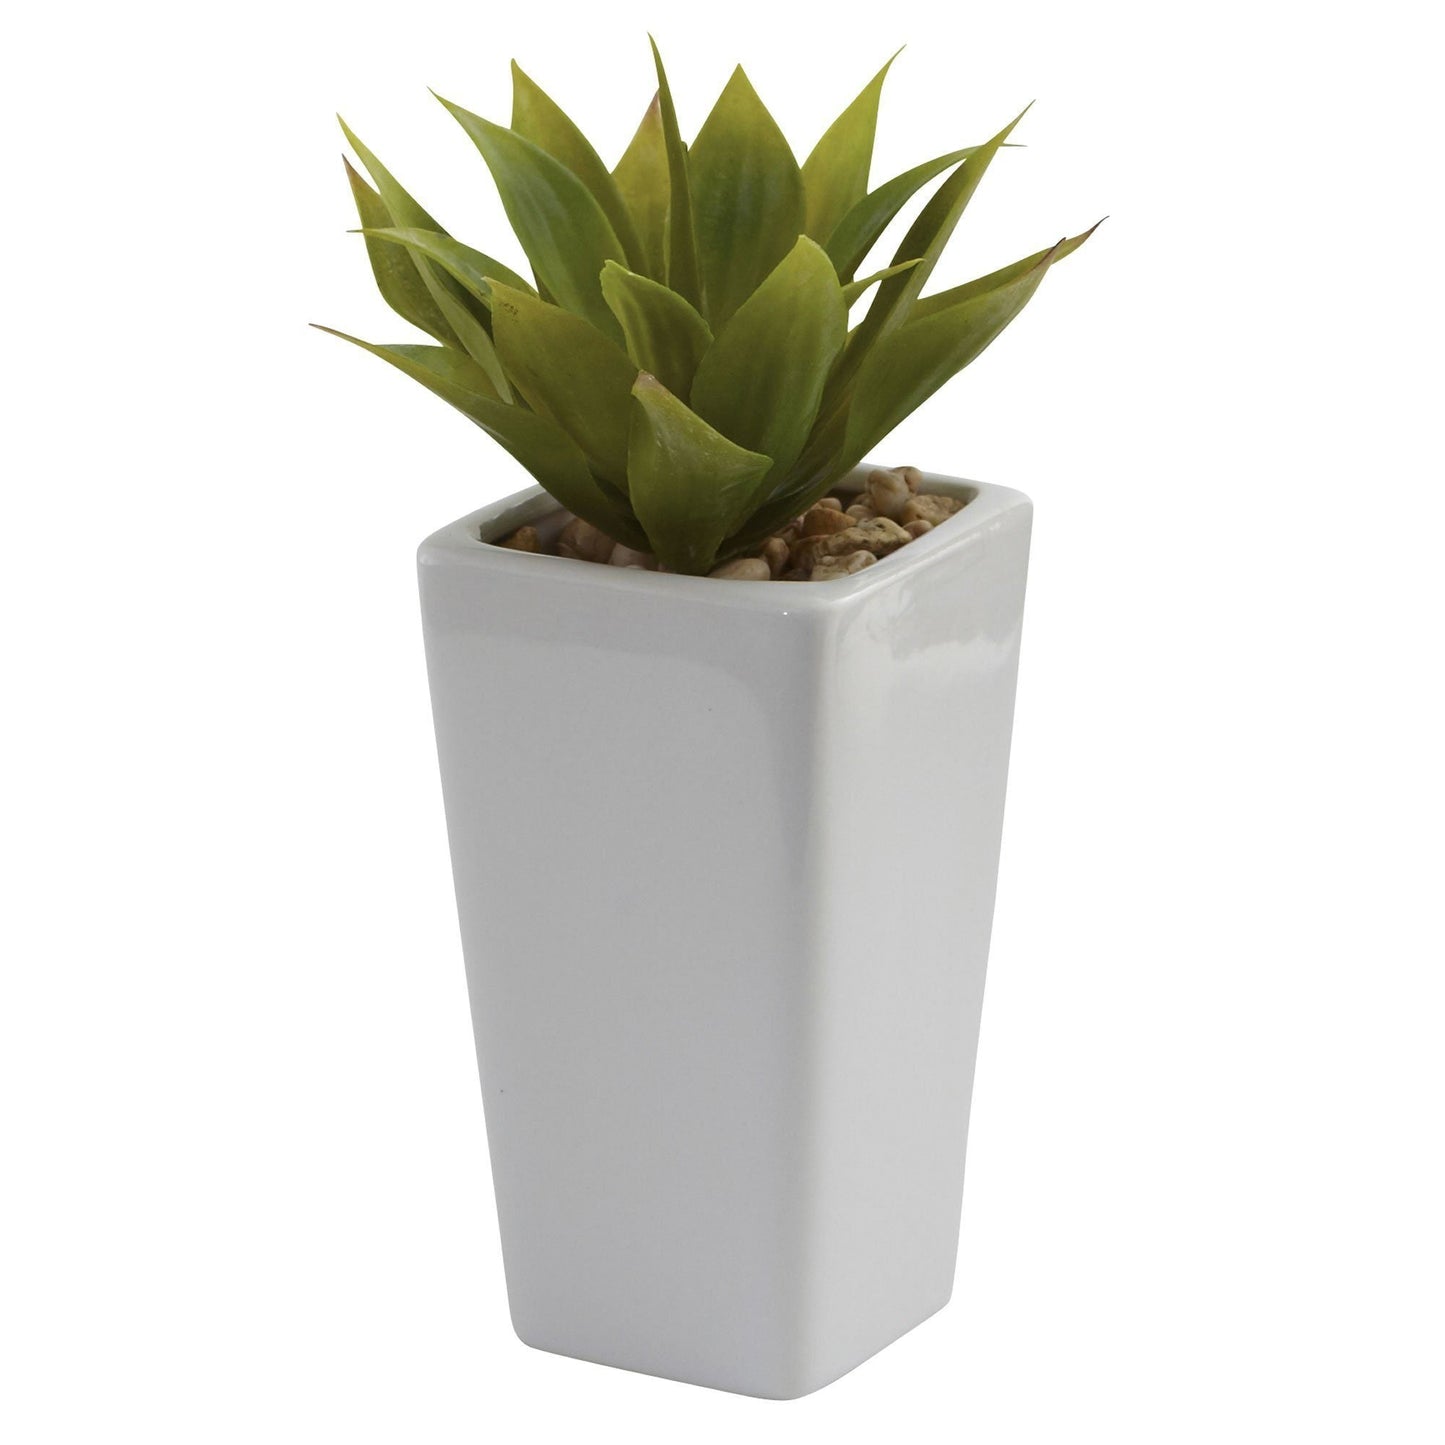 Mini Agave w/ Planter (Set of 3) White by Nearly Natural